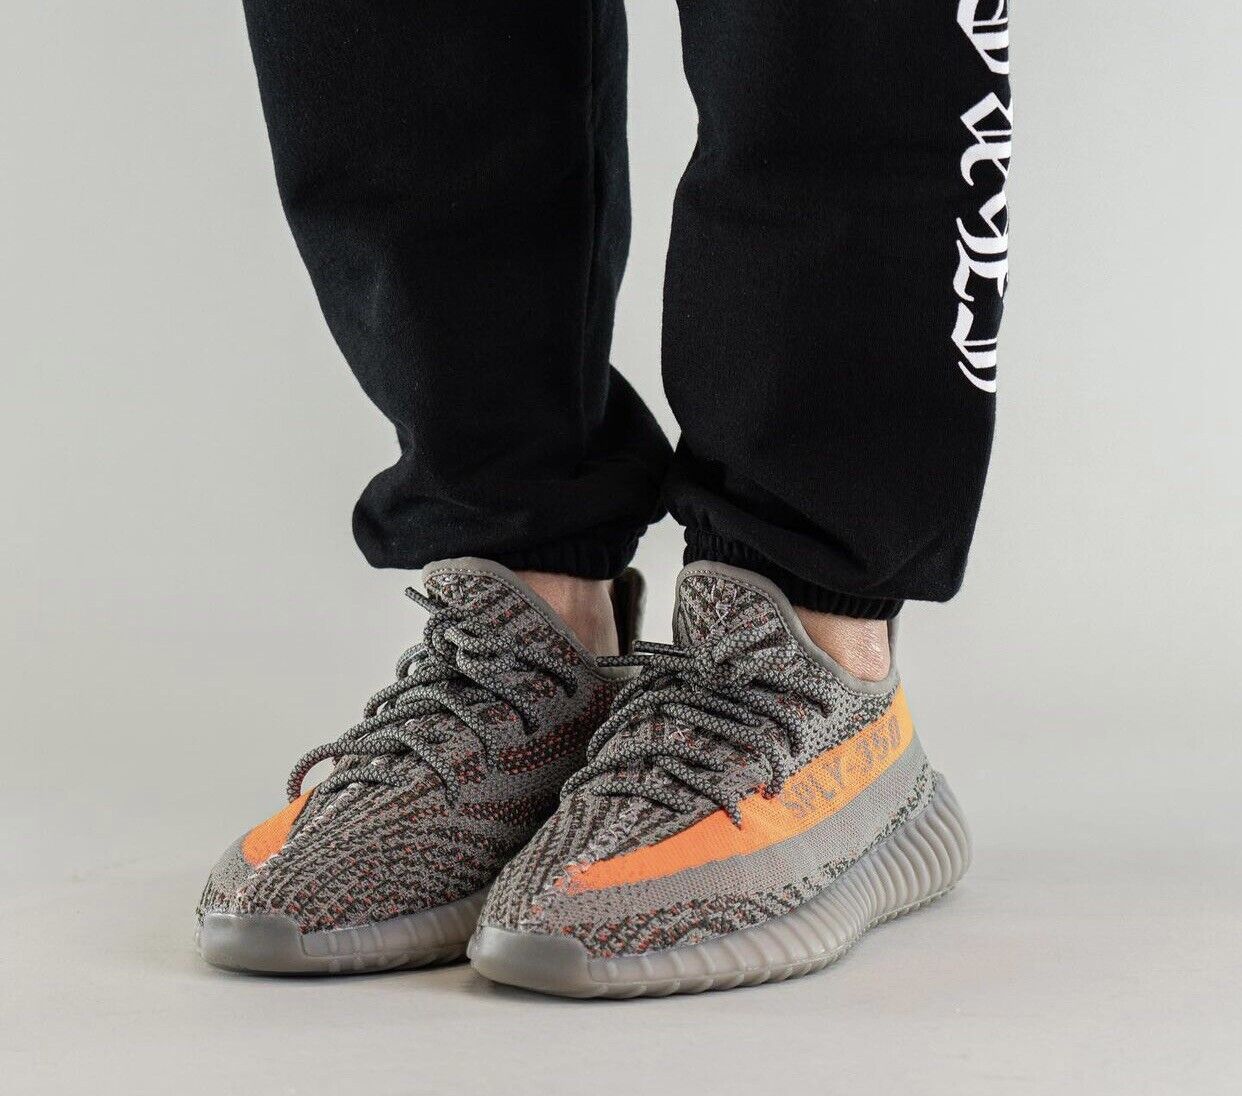 All You Need to Know About the Yeezy Boost 350 V2 Beluga Reflective Sneakers eBay